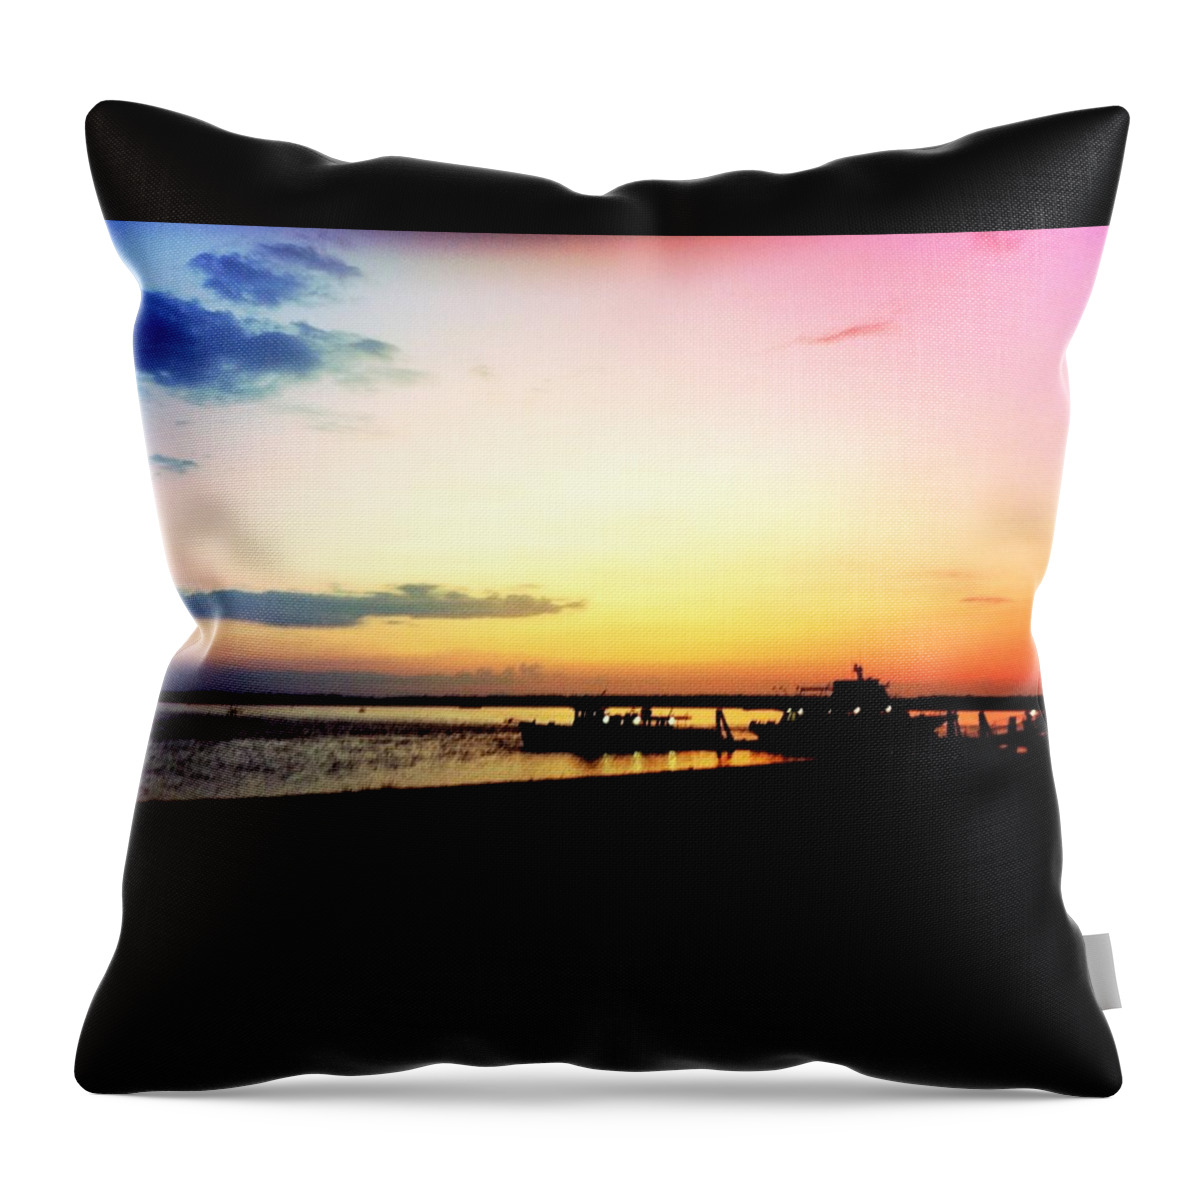 Sunset Throw Pillow featuring the photograph Last Light by Denyse Duhaime